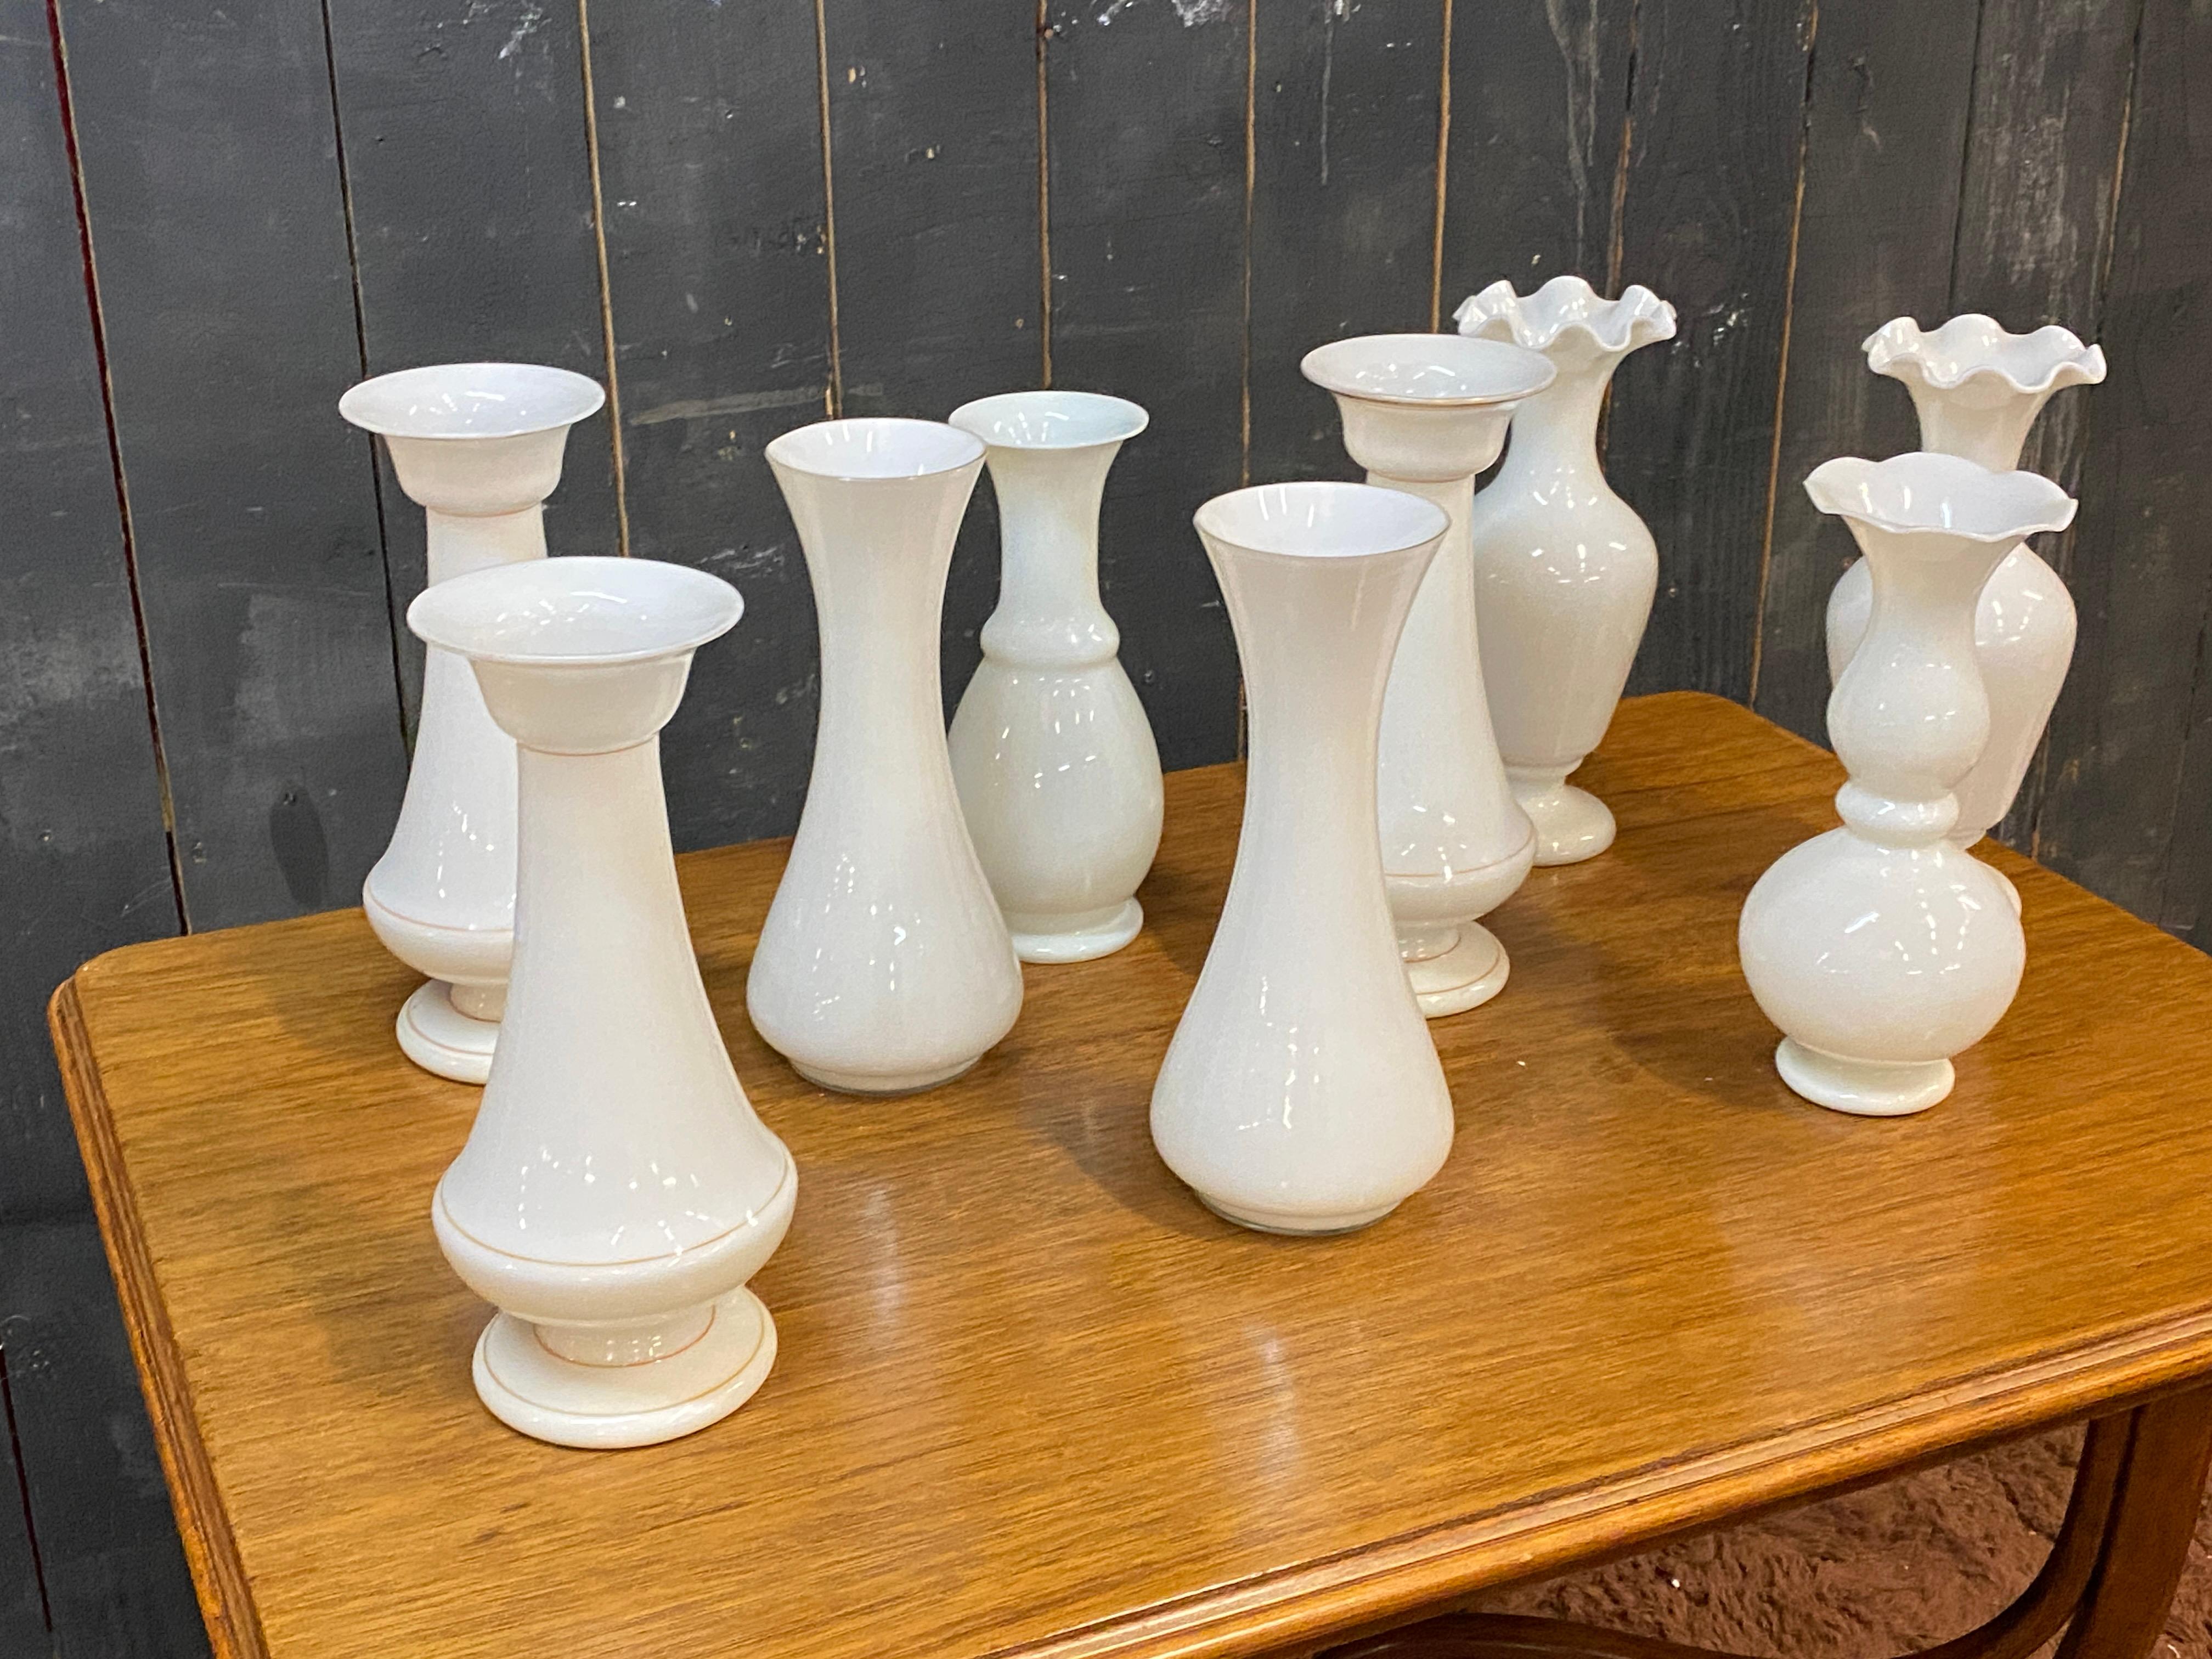 Lot of 9 original opaline vases from the Napoleon III period,
height from 11.42